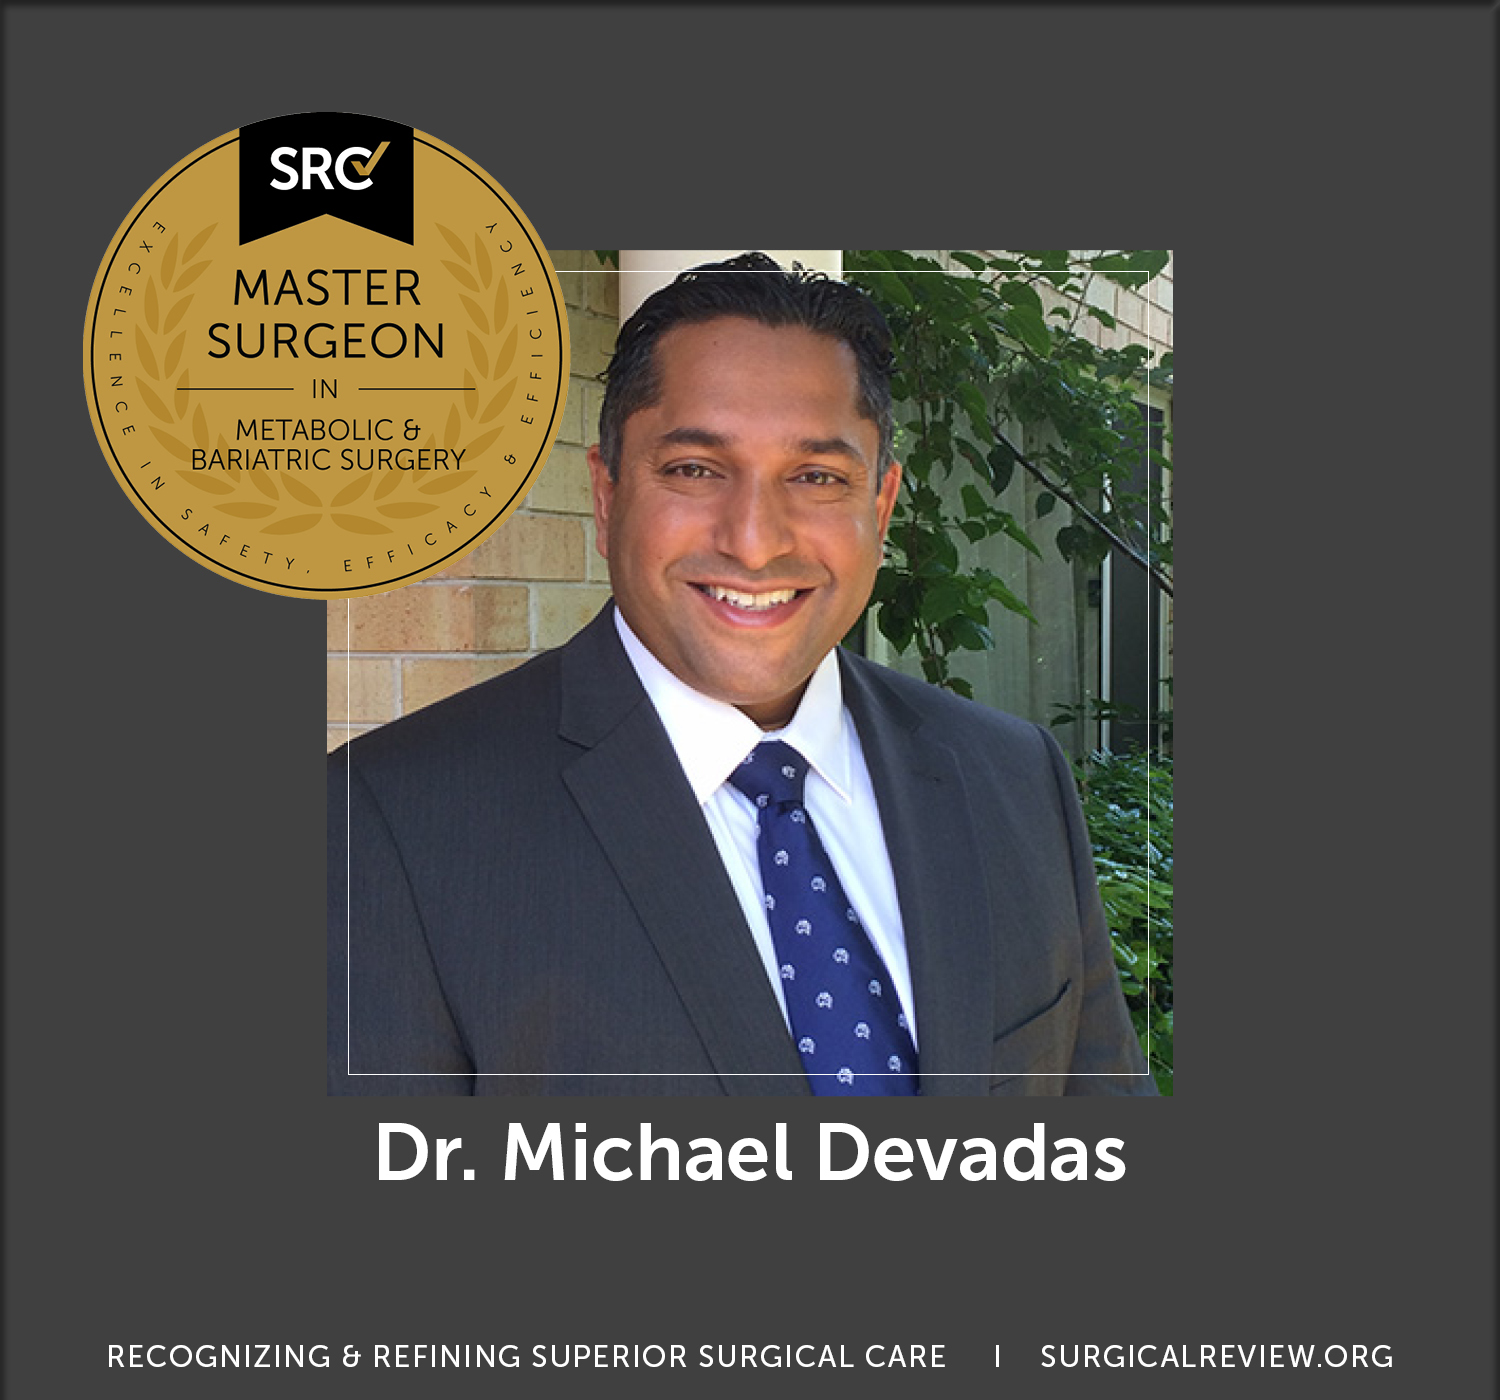 Dr. Michael Devadas Master Surgeon in Metabolic and Bariatric Surgery